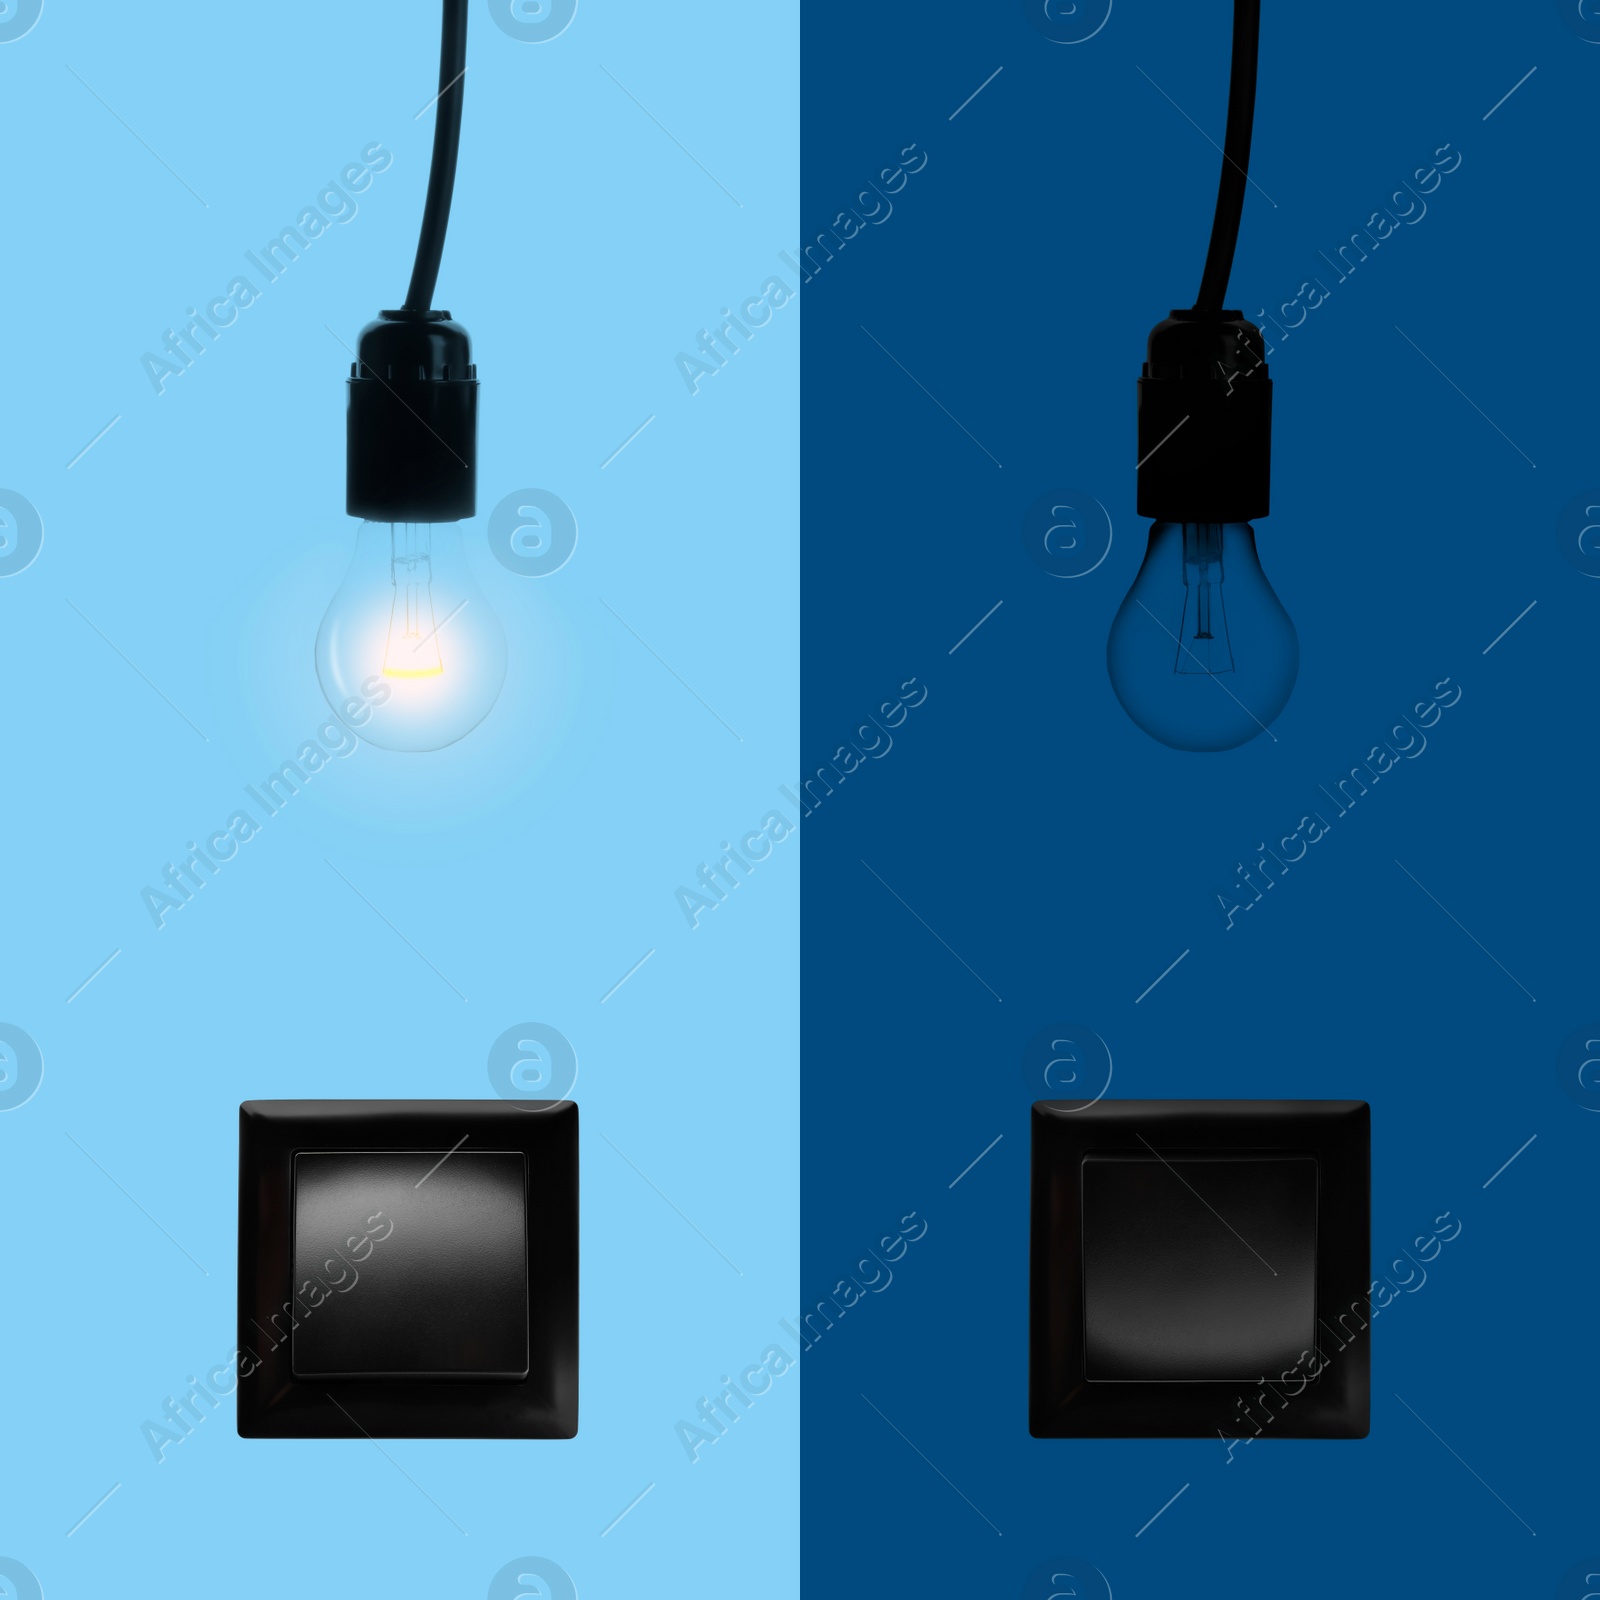 Image of Turned ON and OFF light switches and bulbs, collage